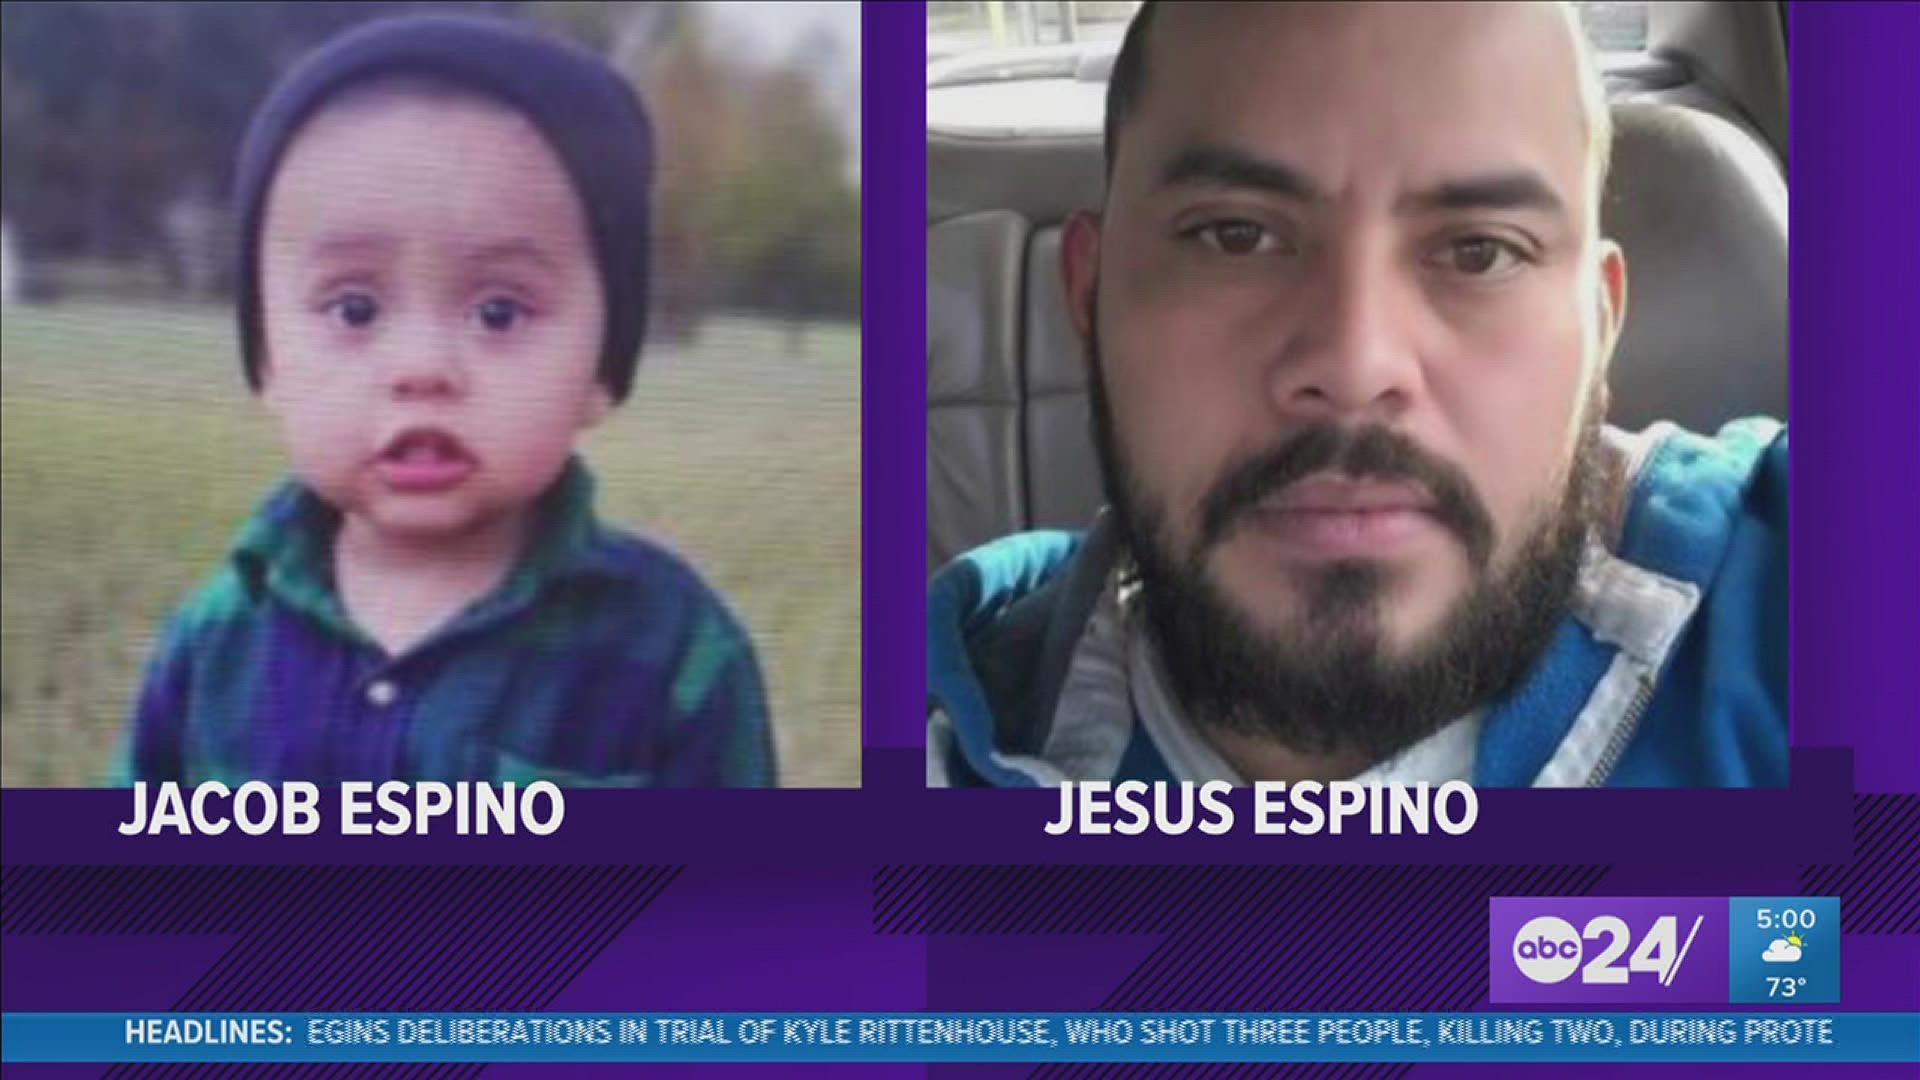 Police said the mother told them Jacob Espino was not in immediate danger with his dad, Jesus Espino.